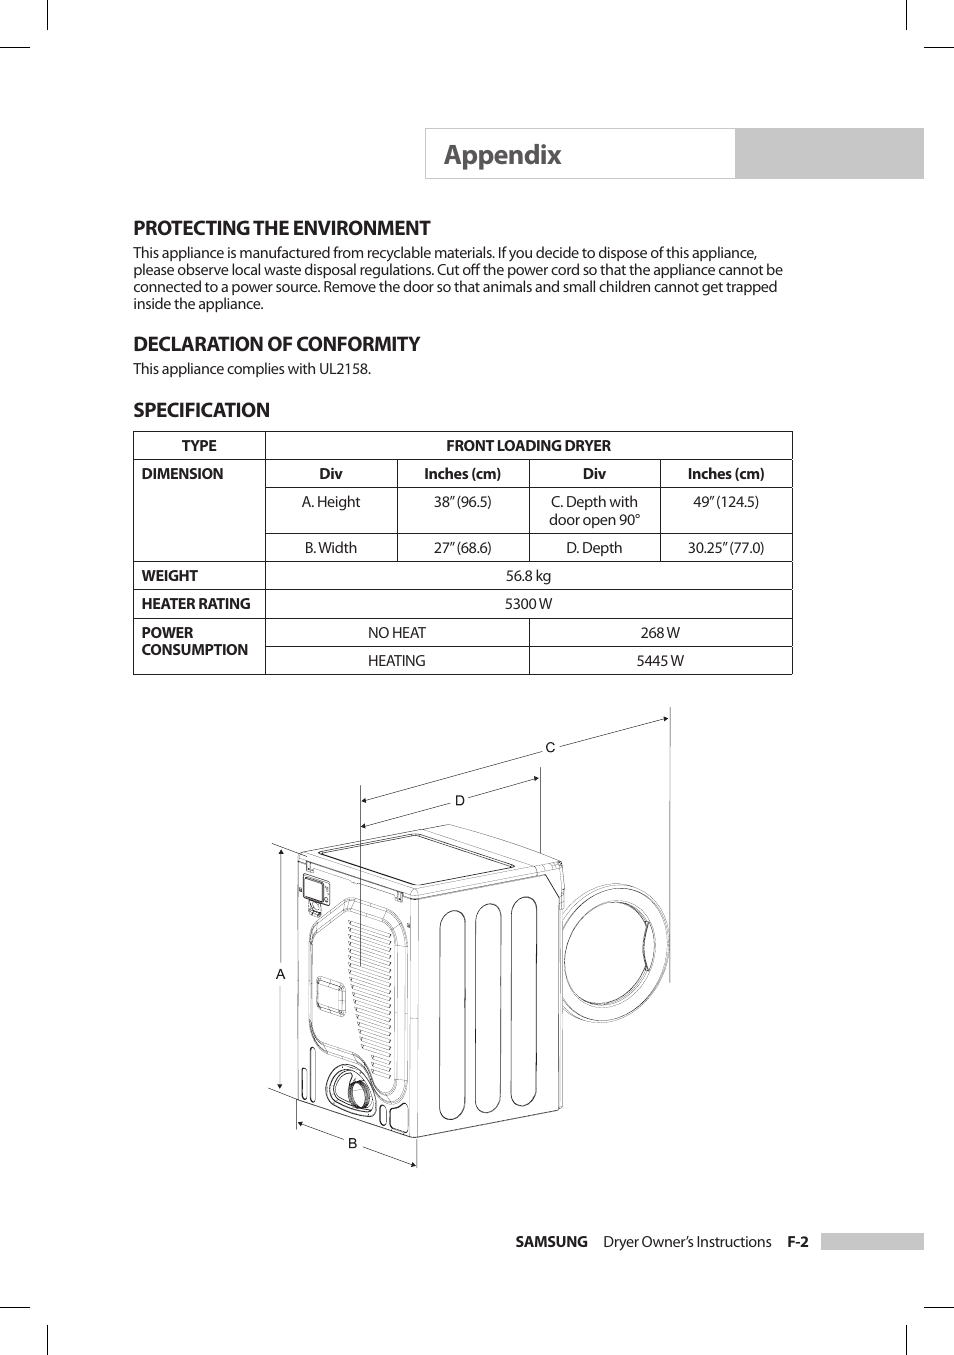 Appendix, Protecting the environment, Declaration of conformity | Specification | Samsung DV206LEW User Manual | Page 25 / 30